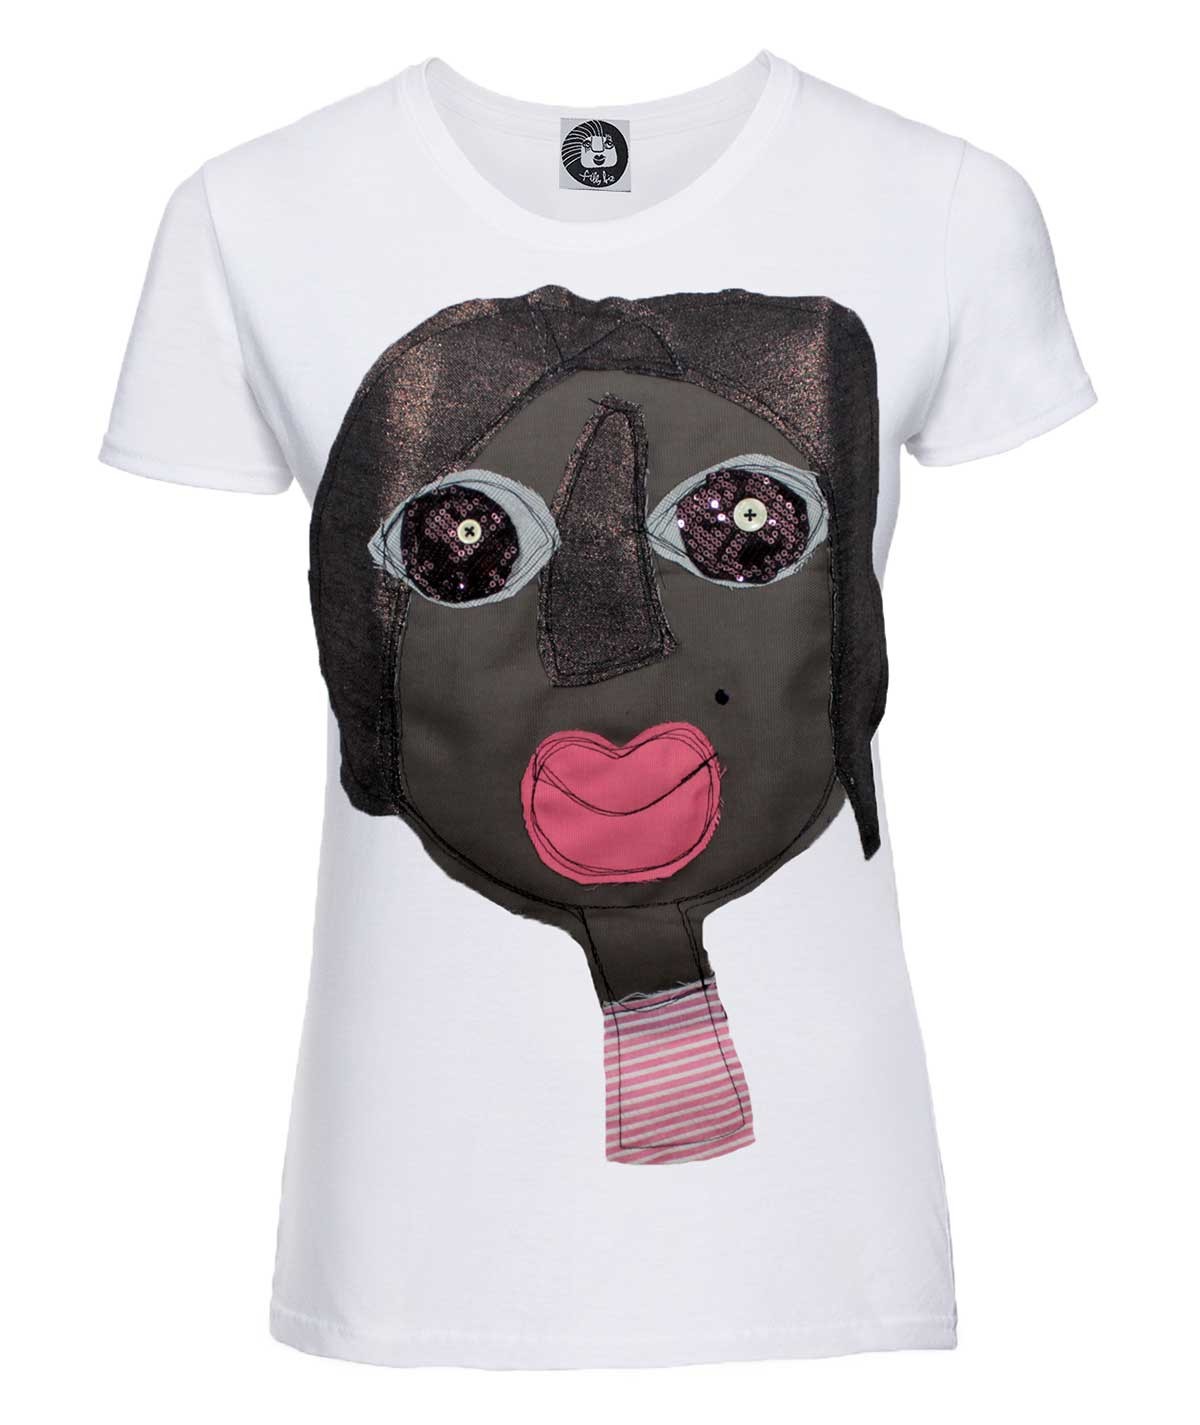 T-shirt with the black woman